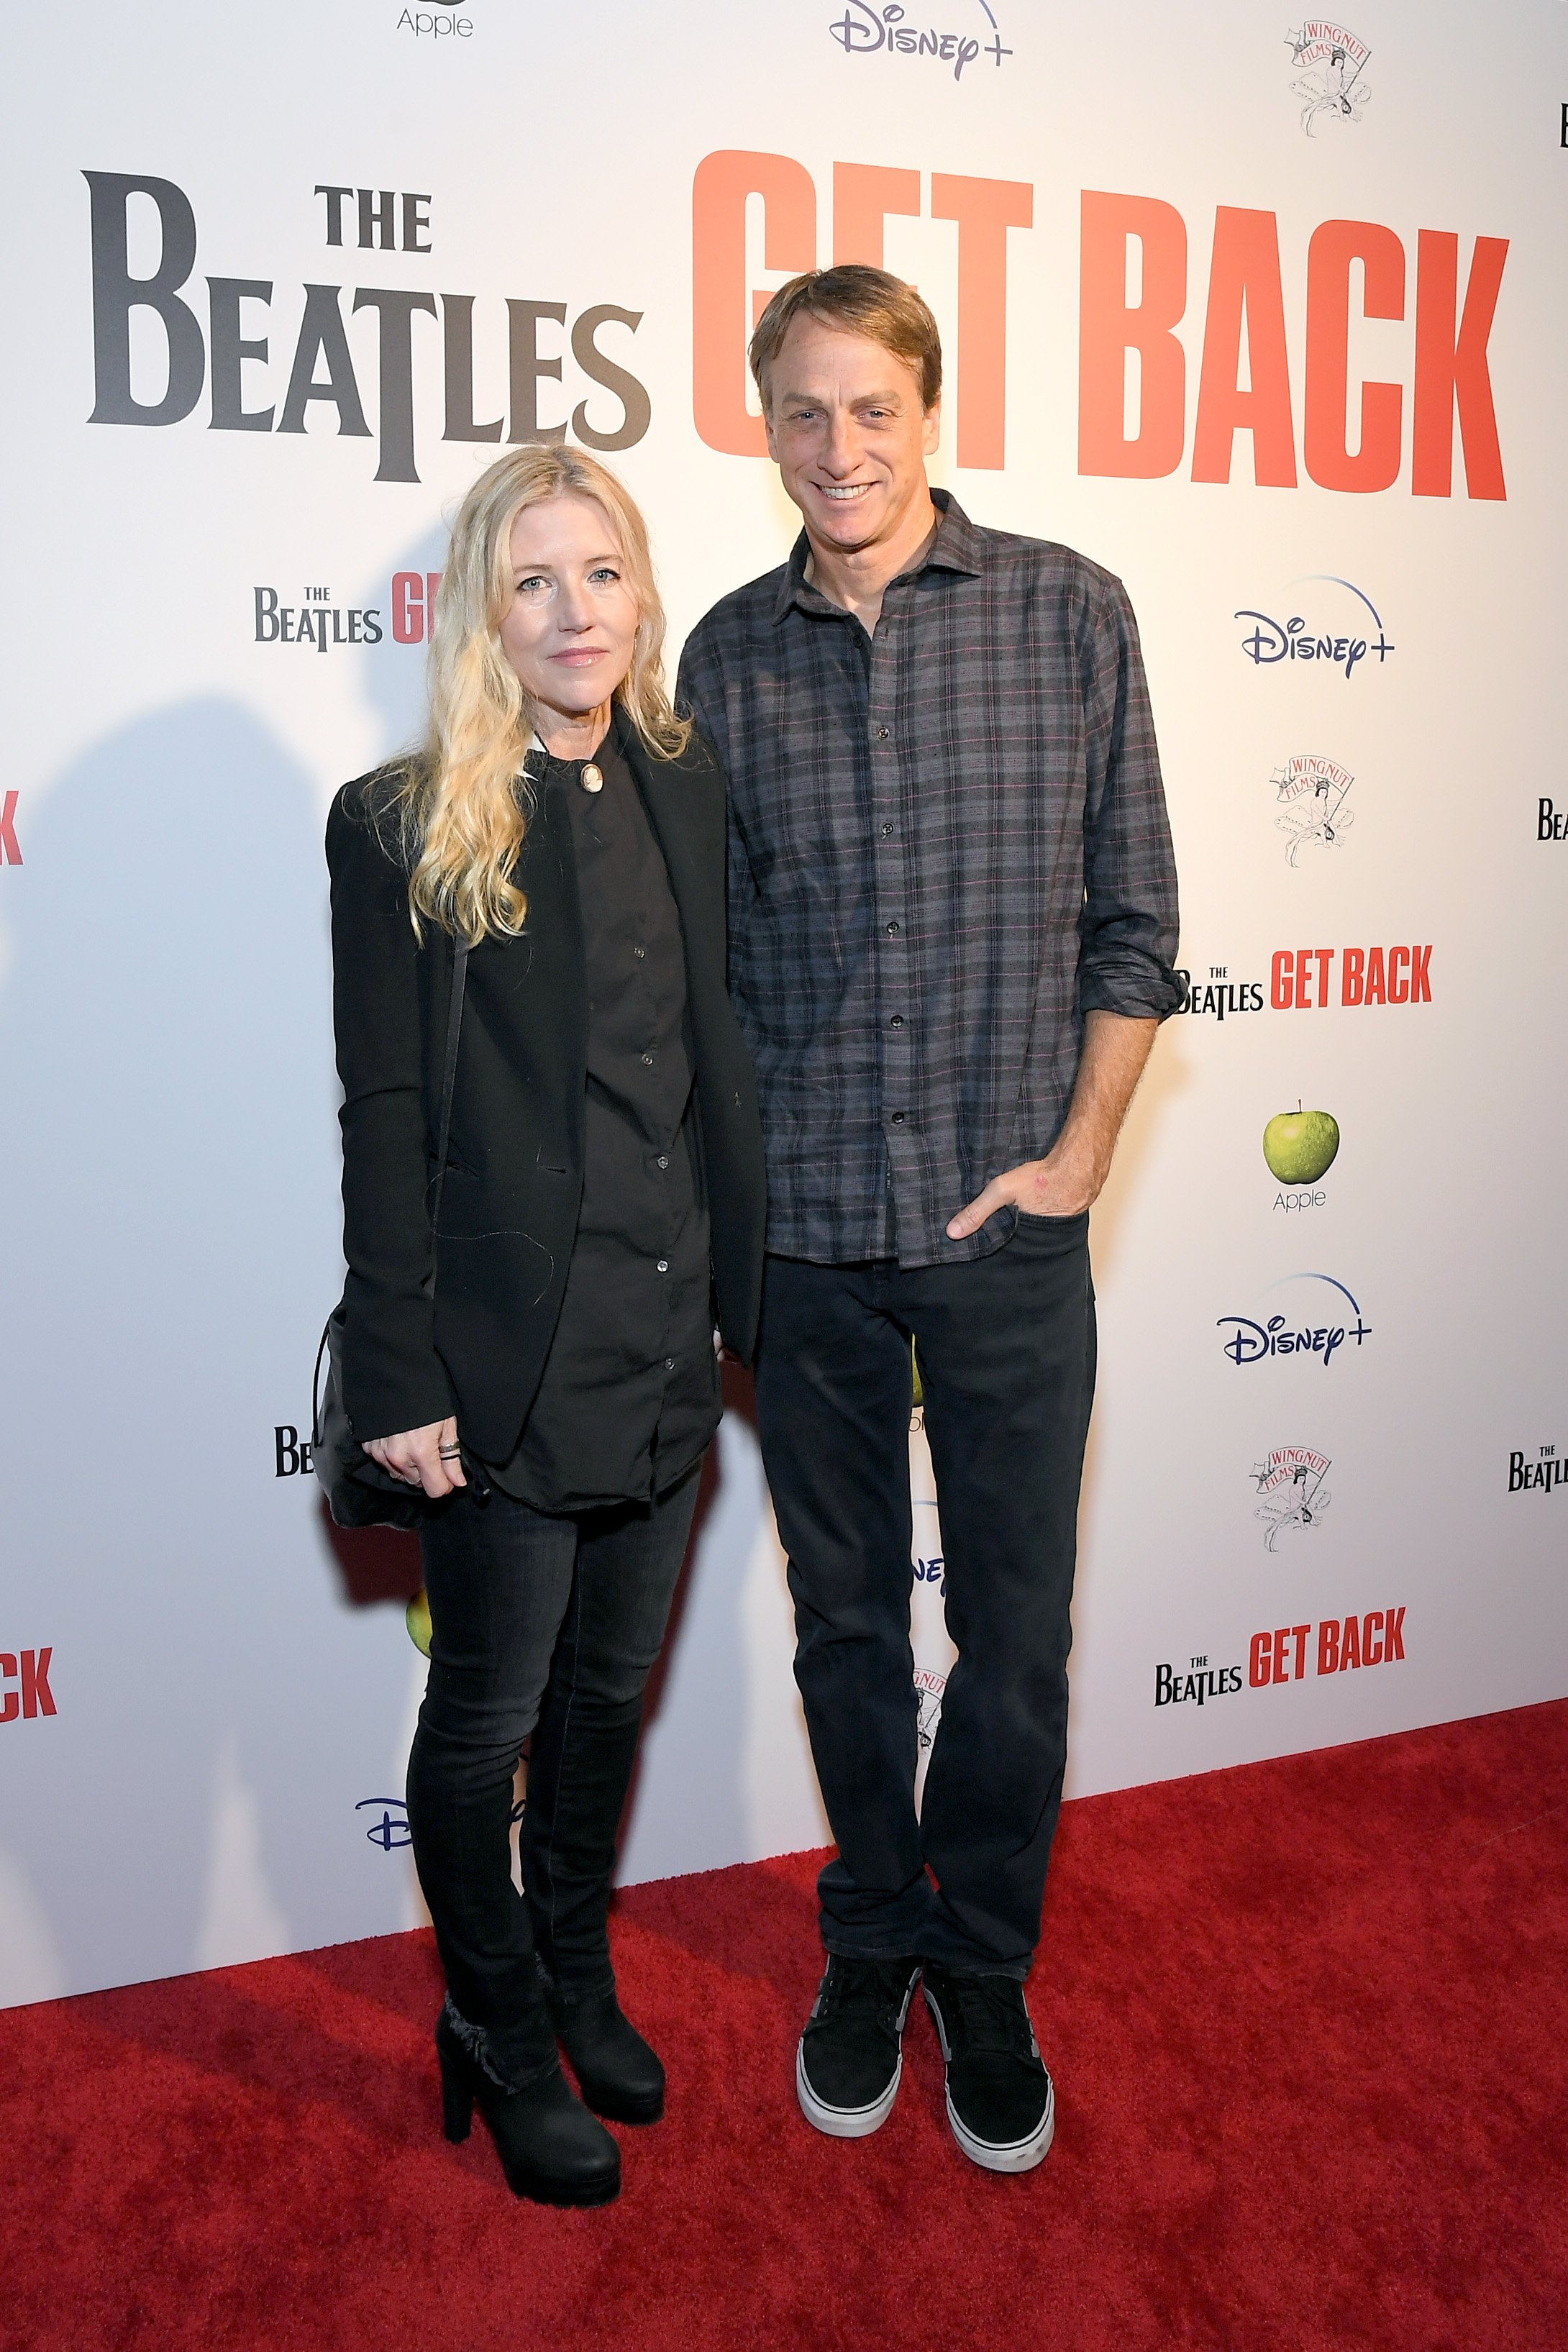 Tony Hawk and his spouse Cathy Goodman attend the Exclusive 100-Minute Sneak Peek of Peter Jackson's The Beatles: Get Back at El Capitan Theatre on November 18, 2021, in Hollywood, California. | Source: Getty Images